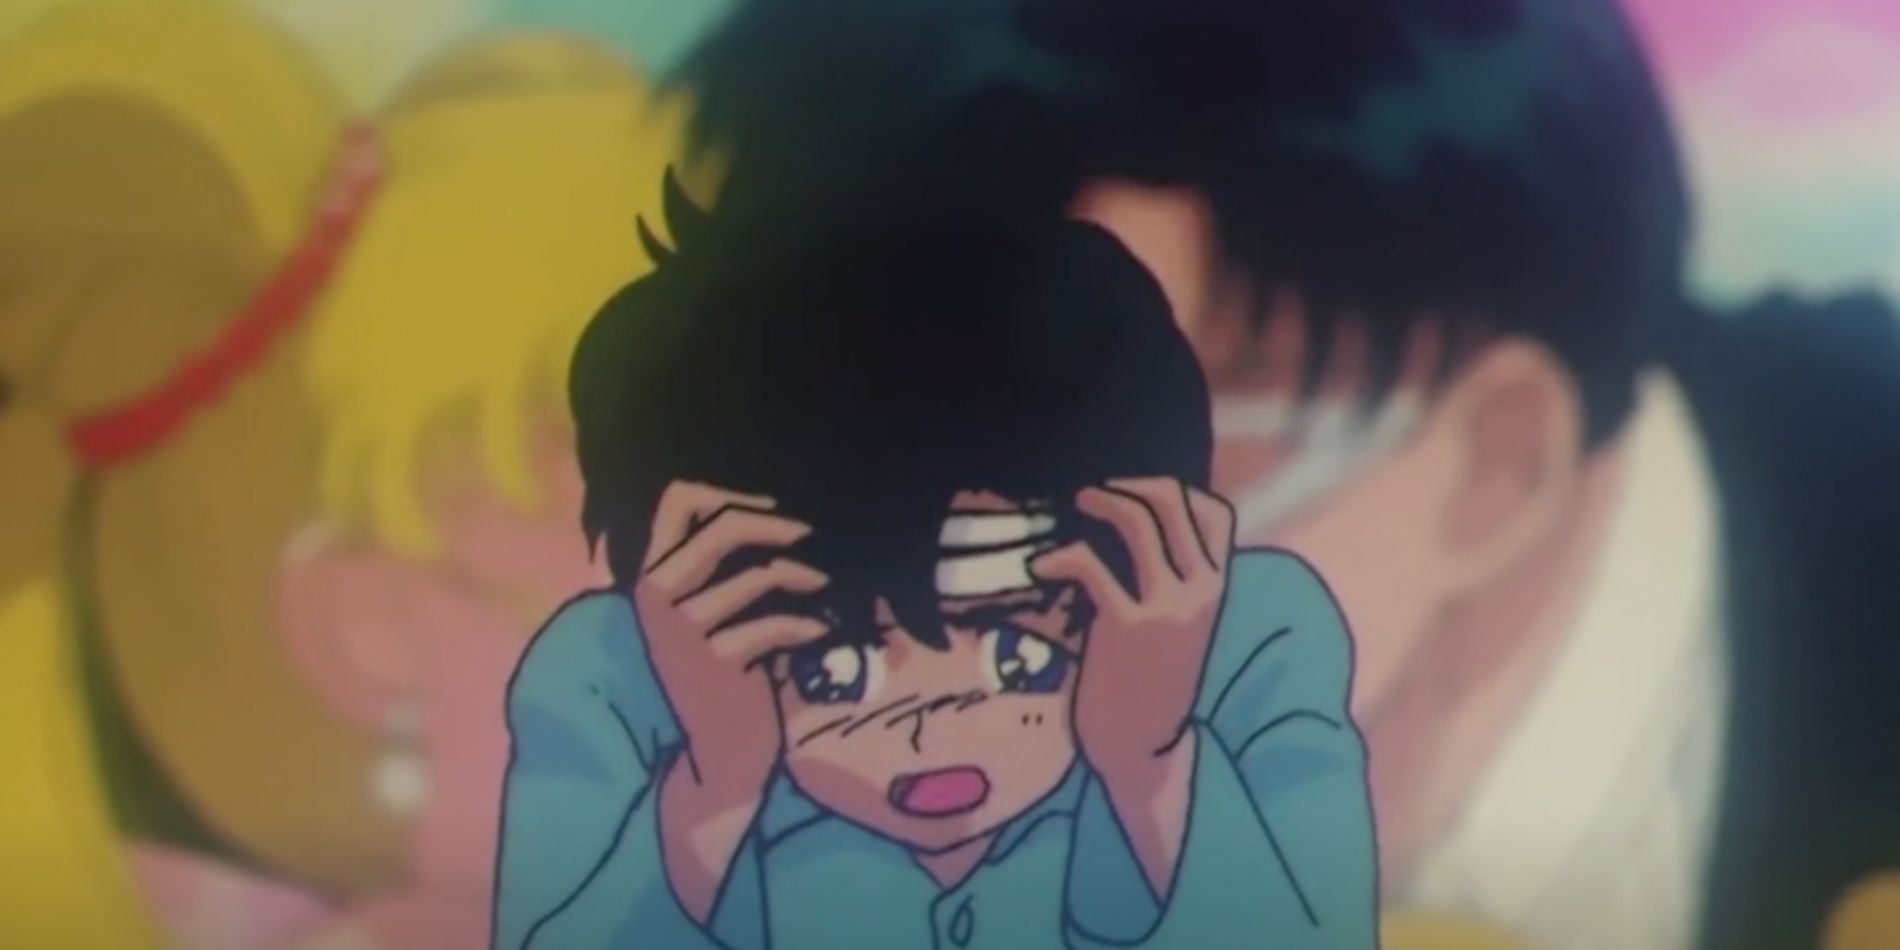 A headache is had from lingering amnesia in Sailor Moon.